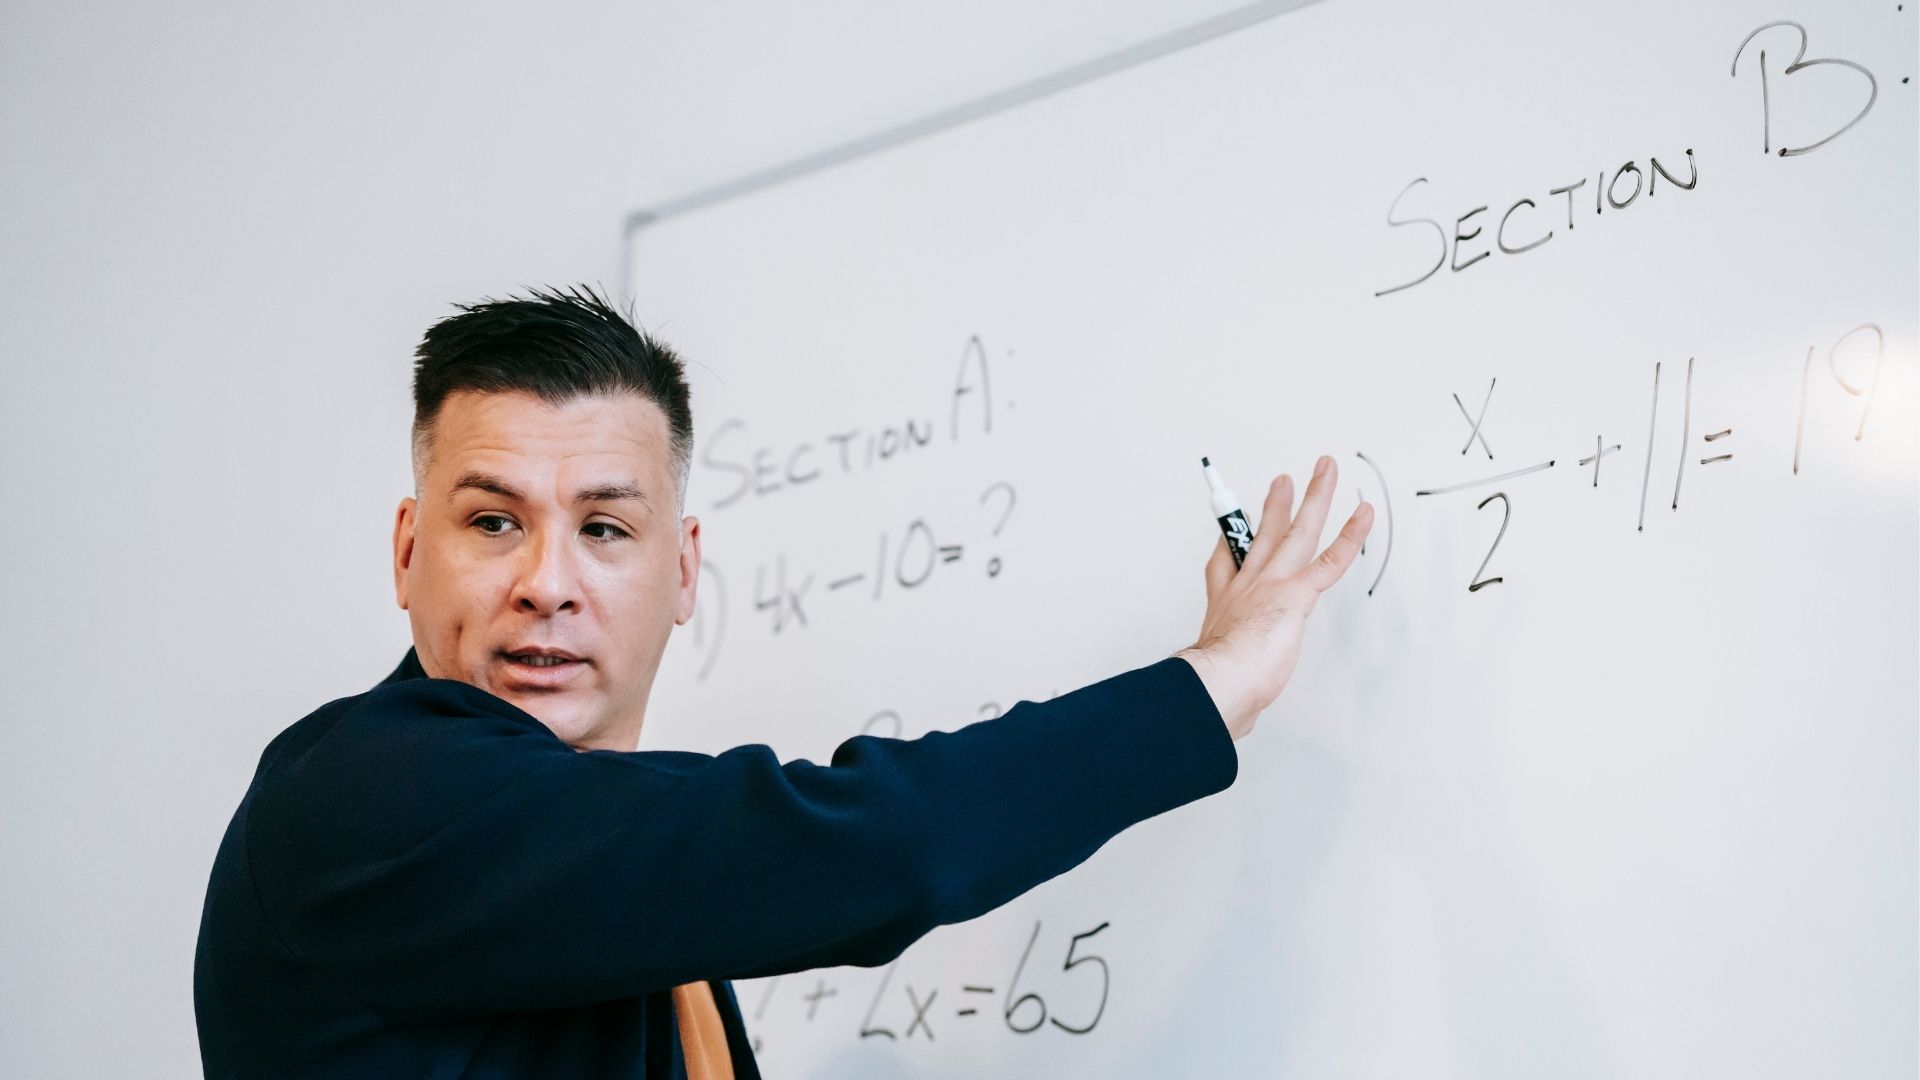 Professor in front of chalkboard saying important things before exam